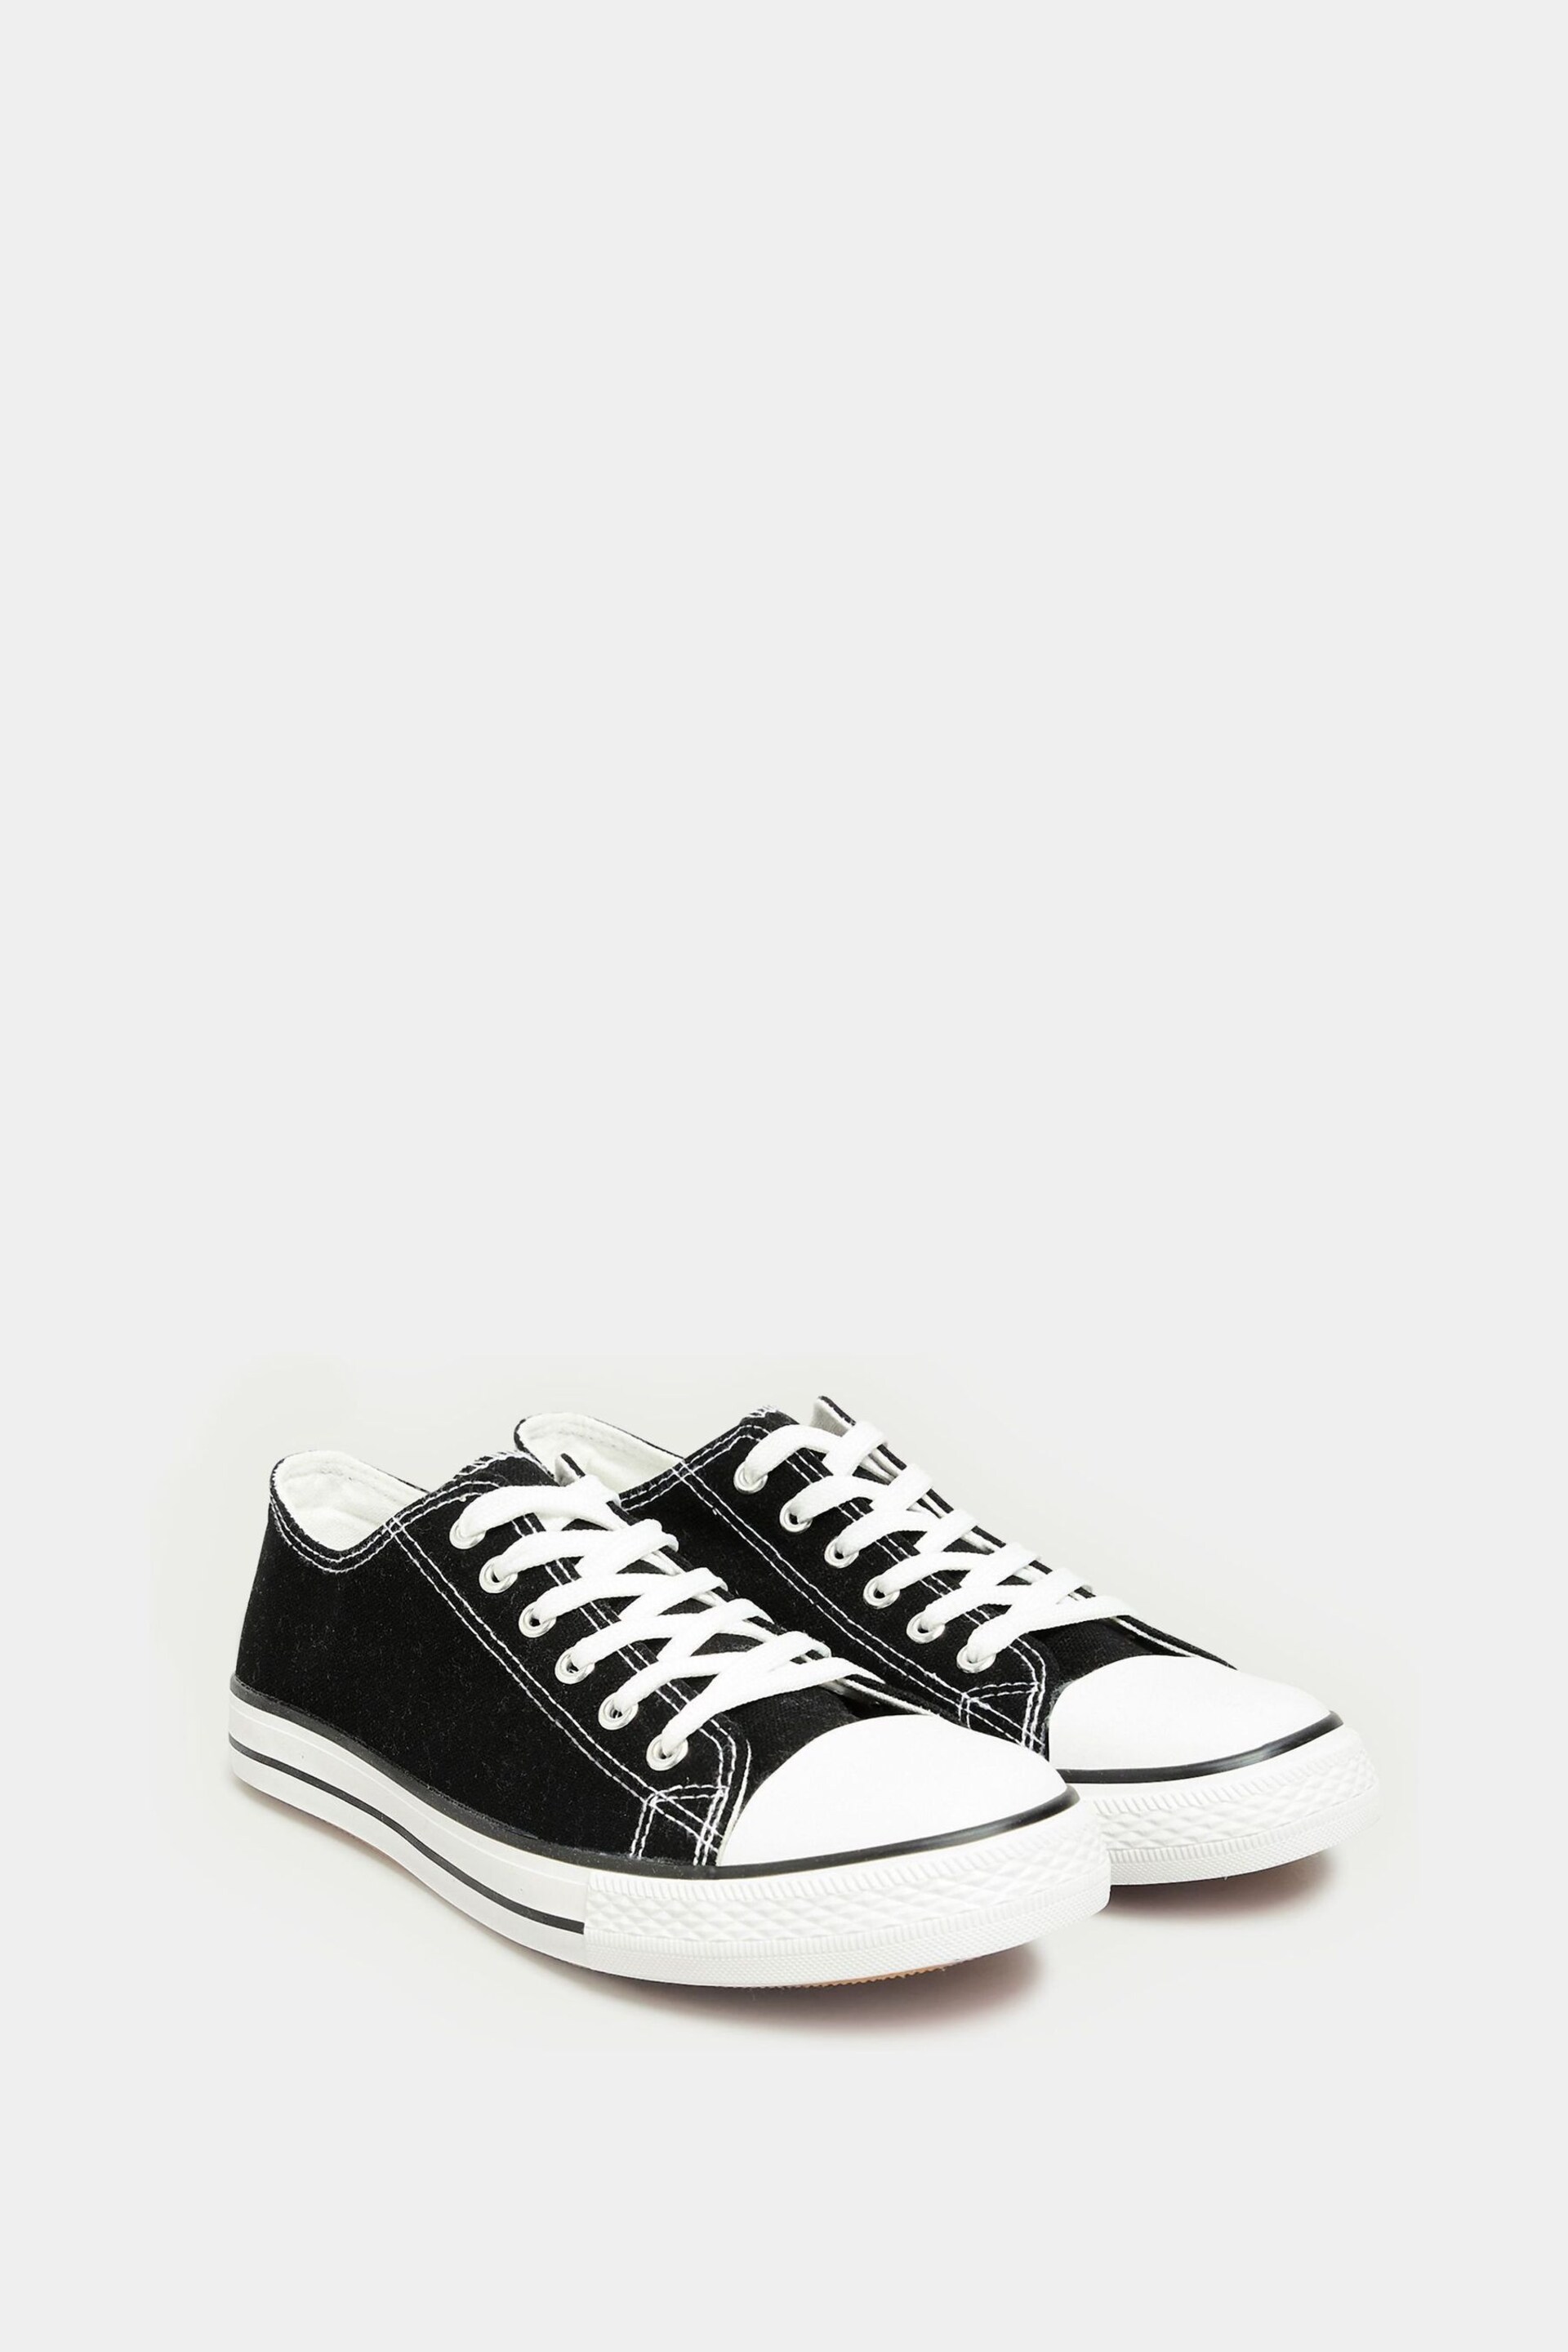 Long Tall Sally Black Canvas Low Trainers - Image 2 of 6